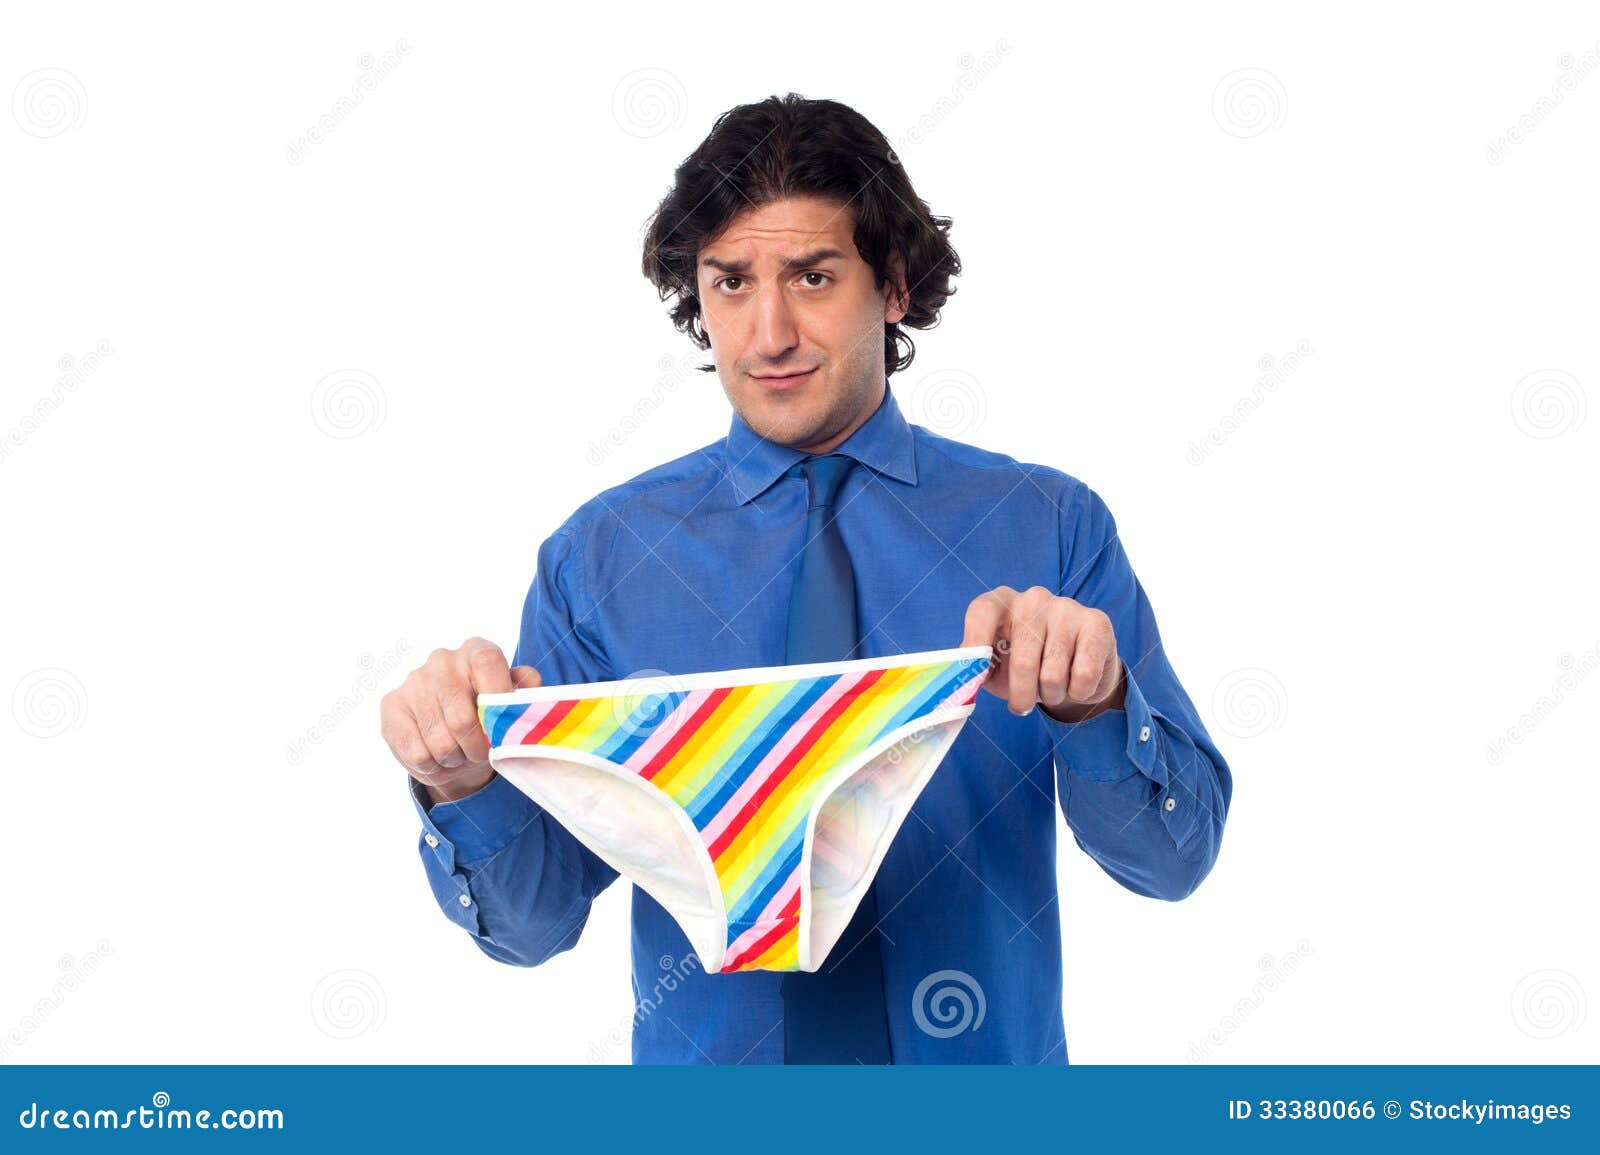 1,571 Colorful Underwear Model Stock Photos - Free & Royalty-Free